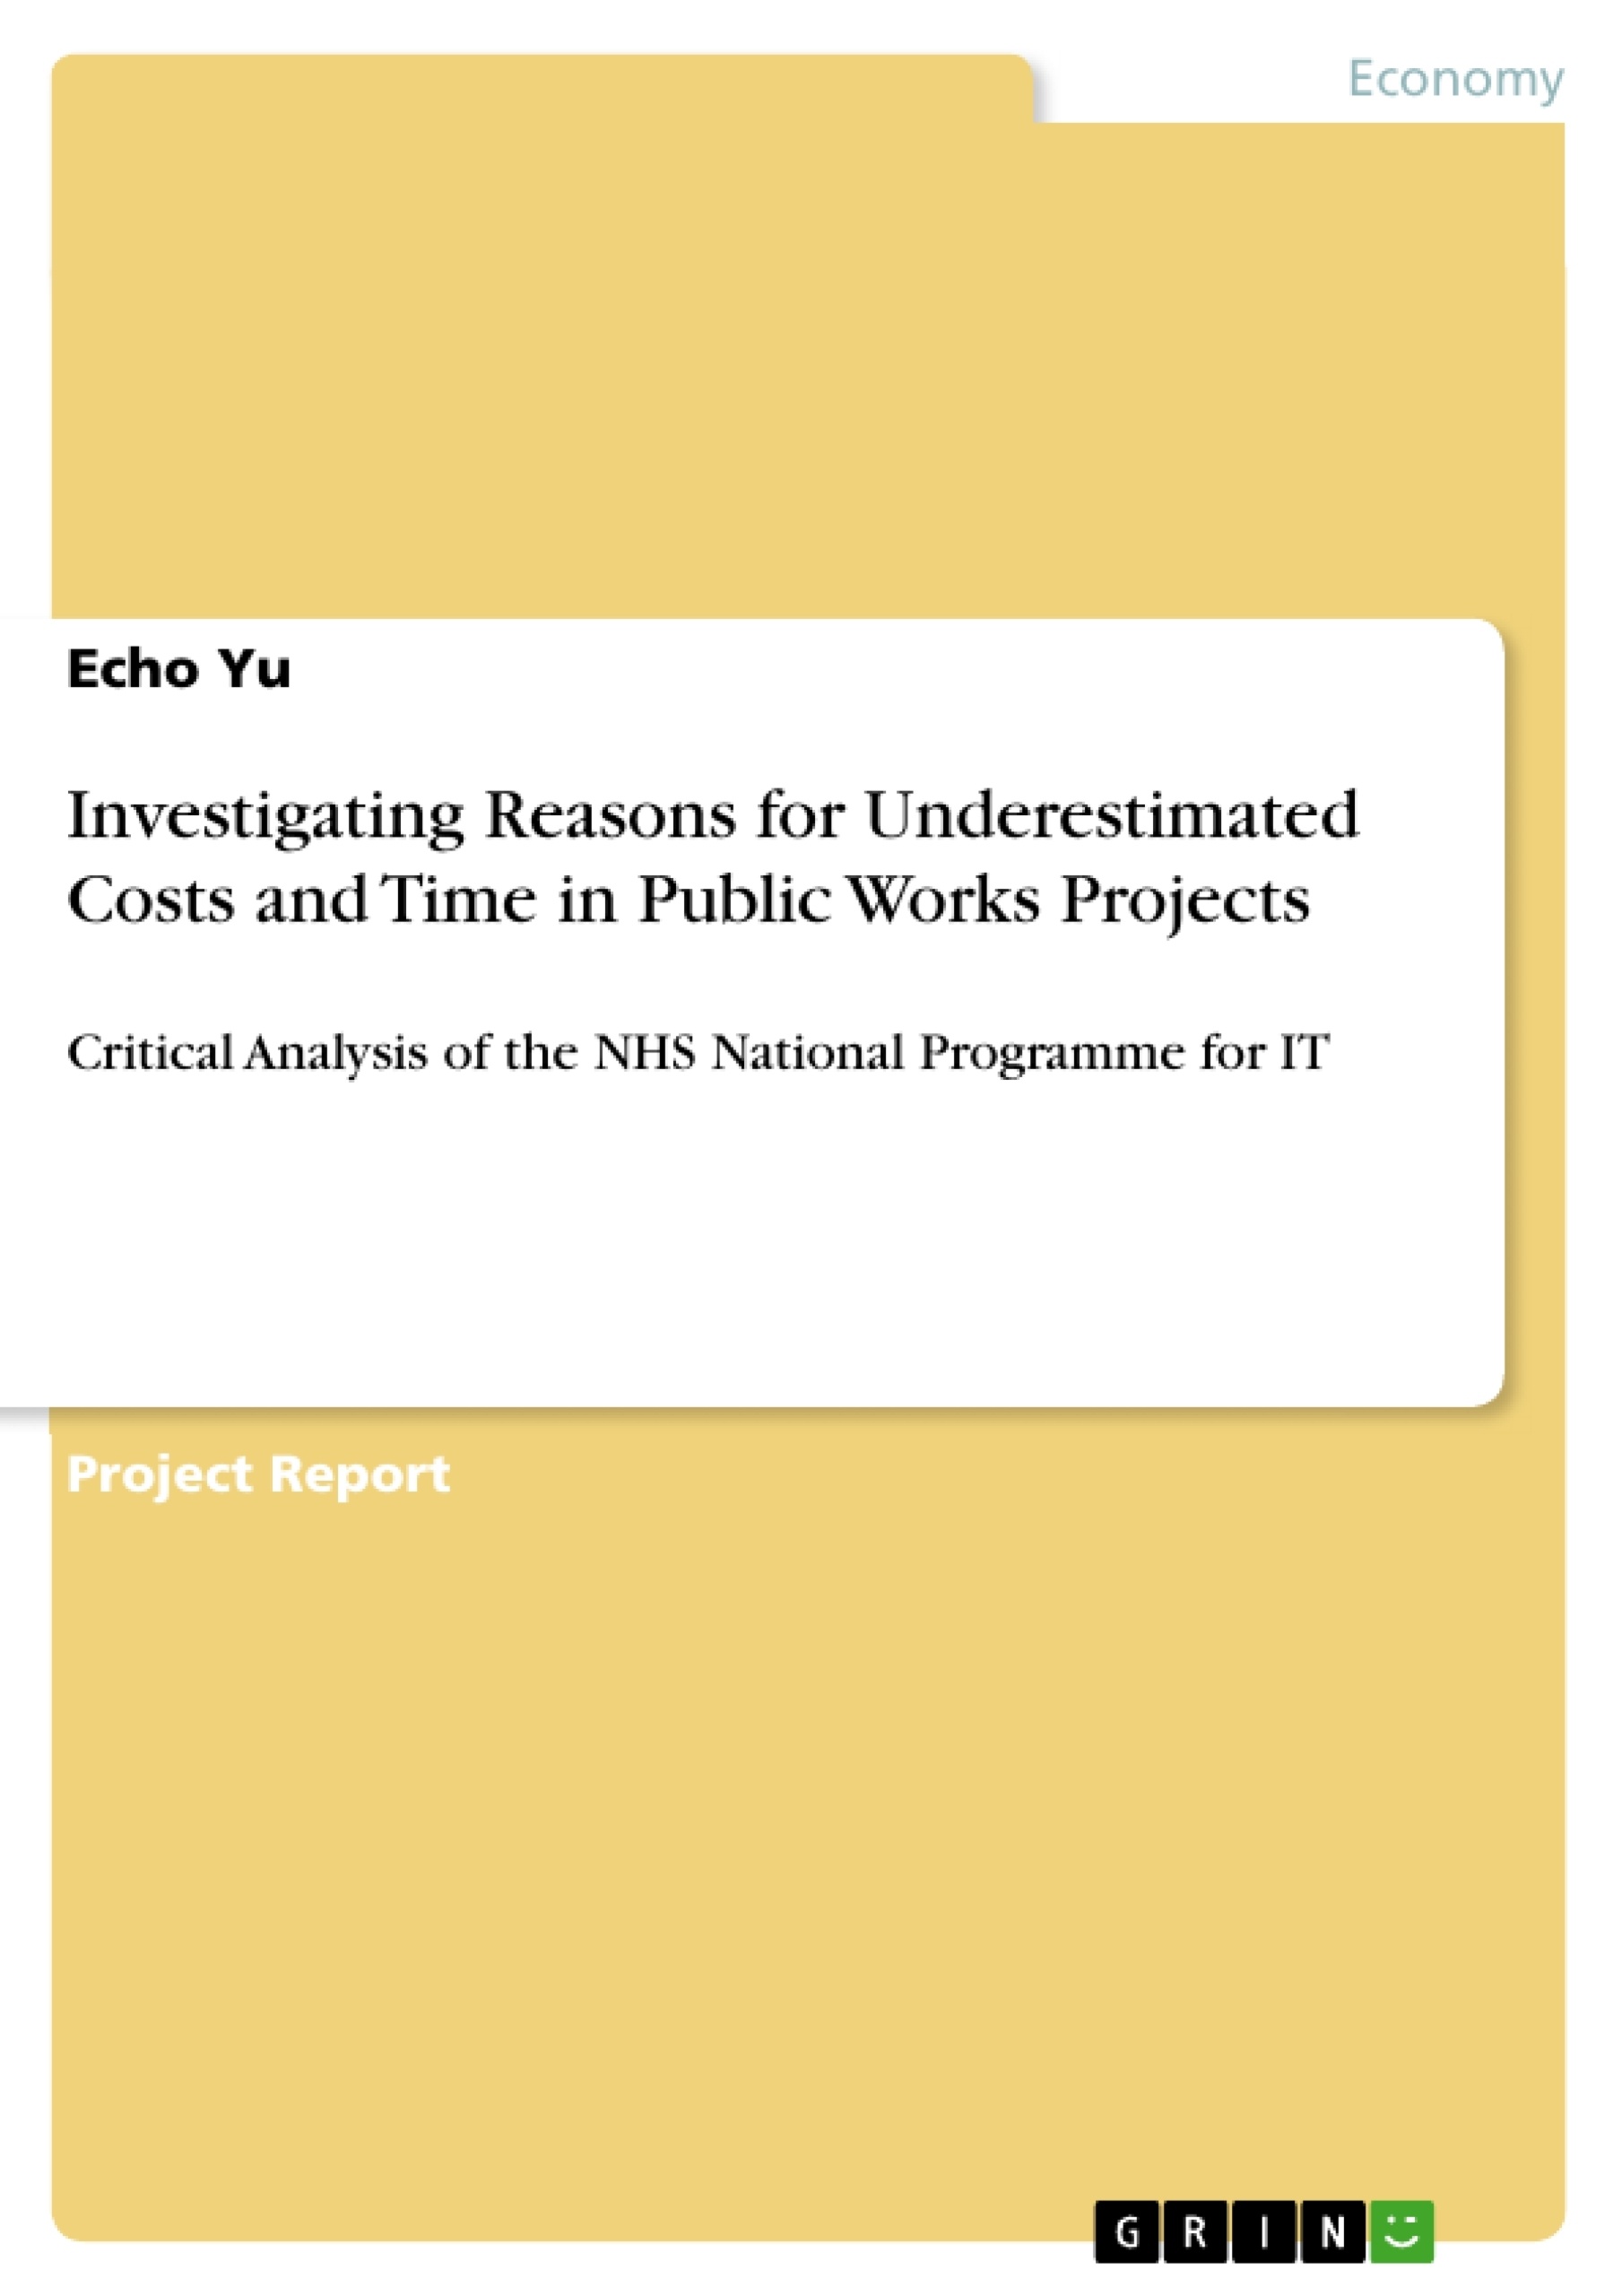 Título: Investigating Reasons for Underestimated Costs and Time in Public Works Projects